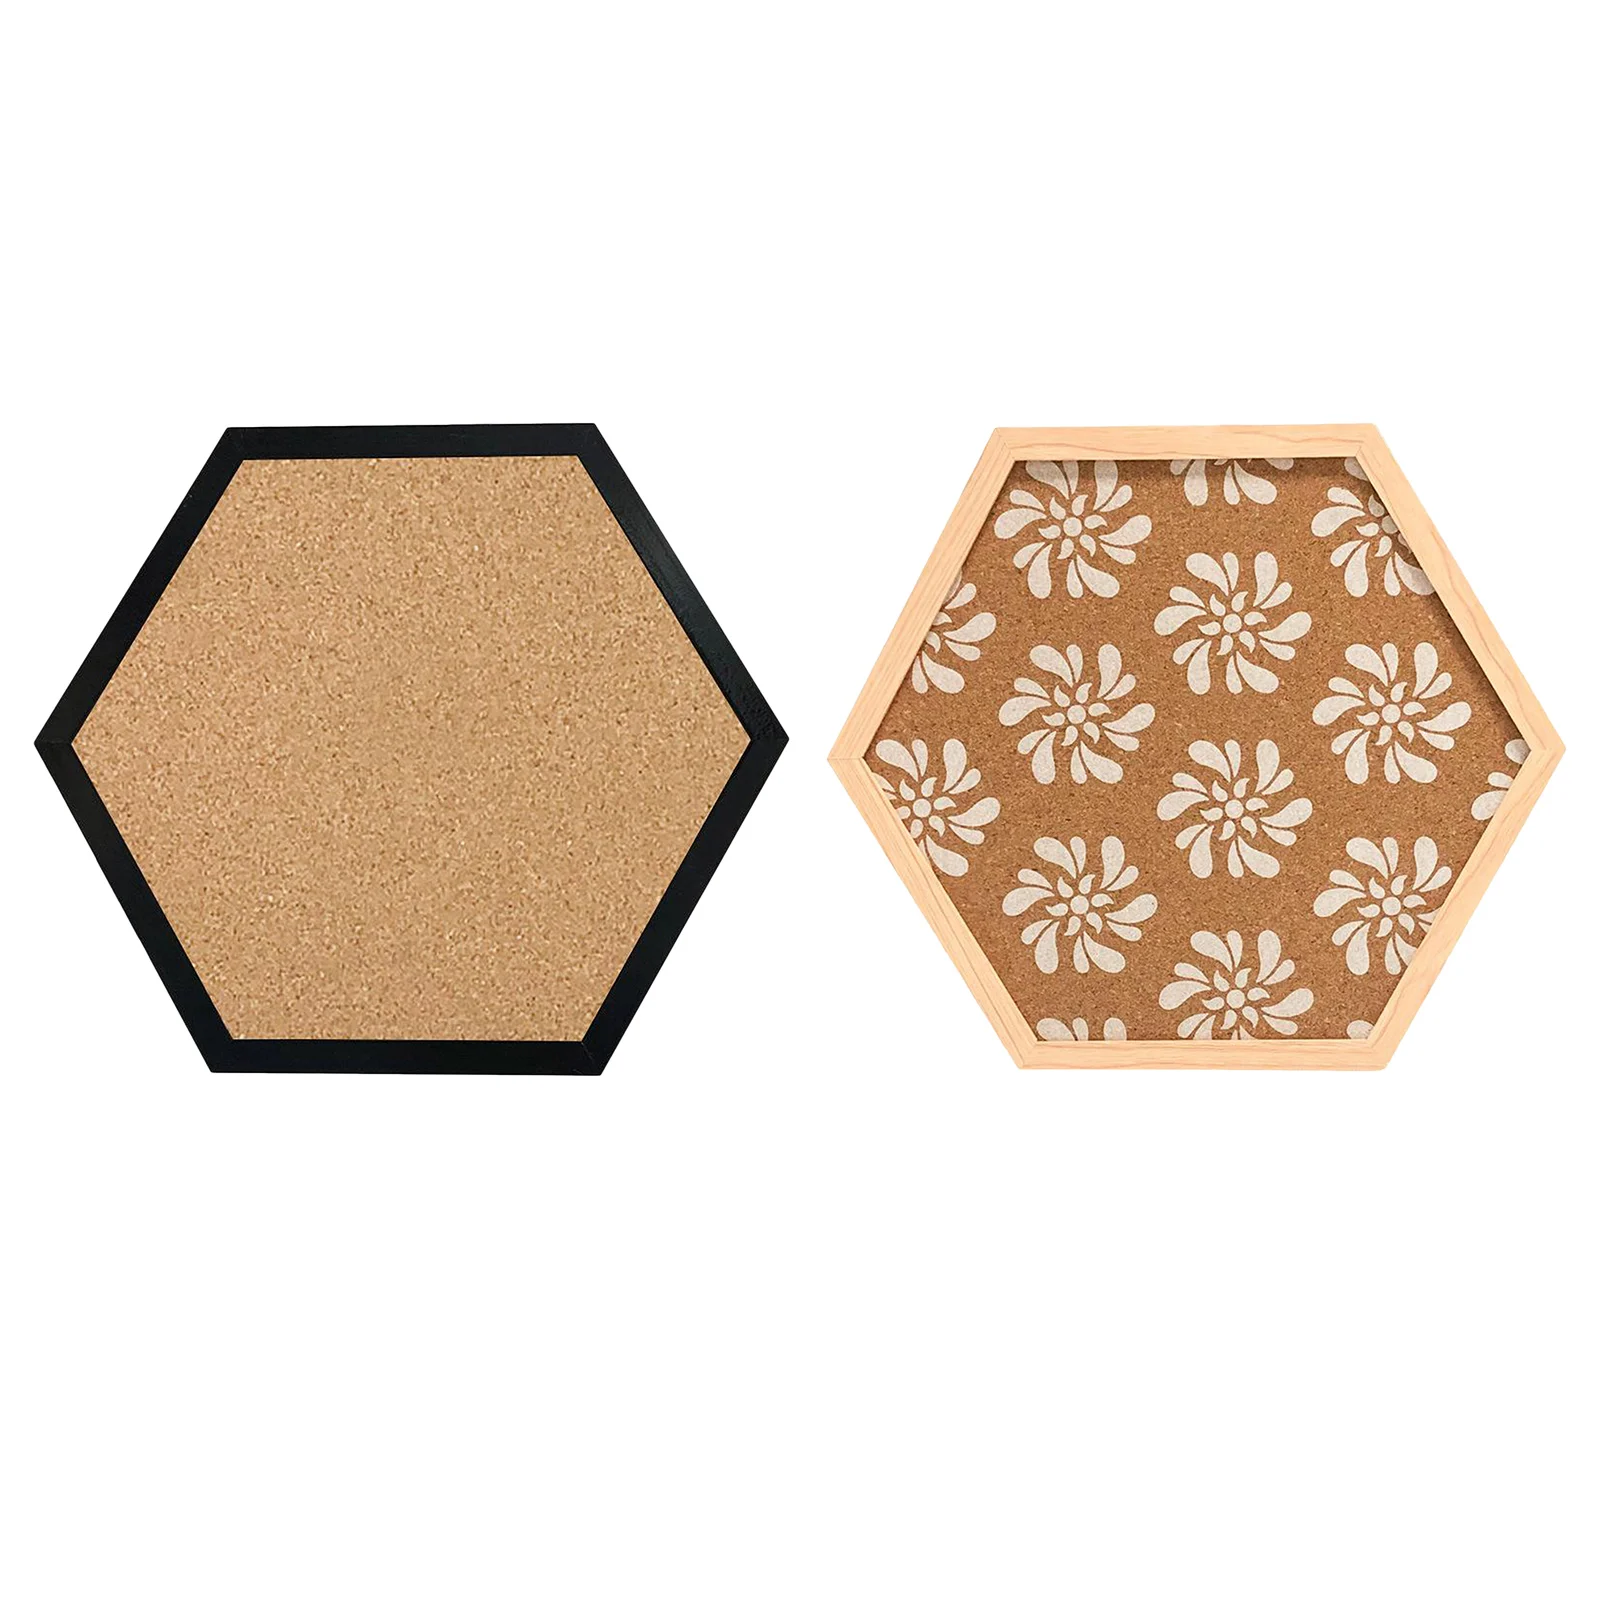 Cork Bulletin Boards - Hexagonal Decorative Tiles - Perfect Pinning Reminders in Your Kitchen, Office School Classroom Home Room